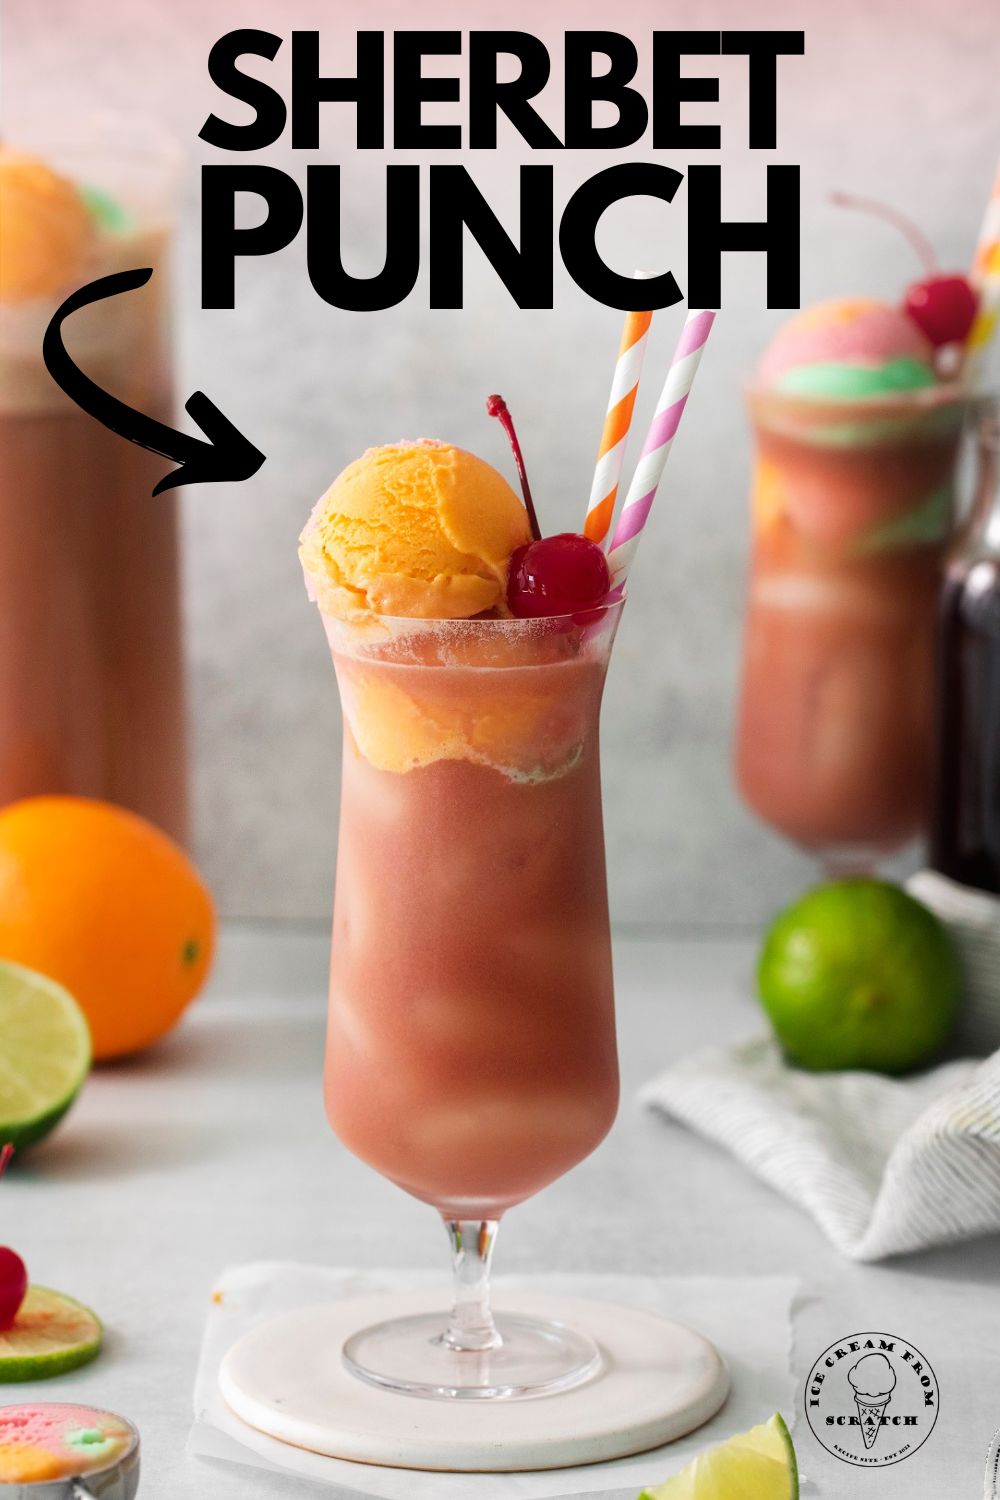 a tall glass of sherbet punch with scoops of orange sherbet on top along with a maraschino cherry.  The text overlay at the top of the image says "sherbet punch" with an arrow pointing to the glass.